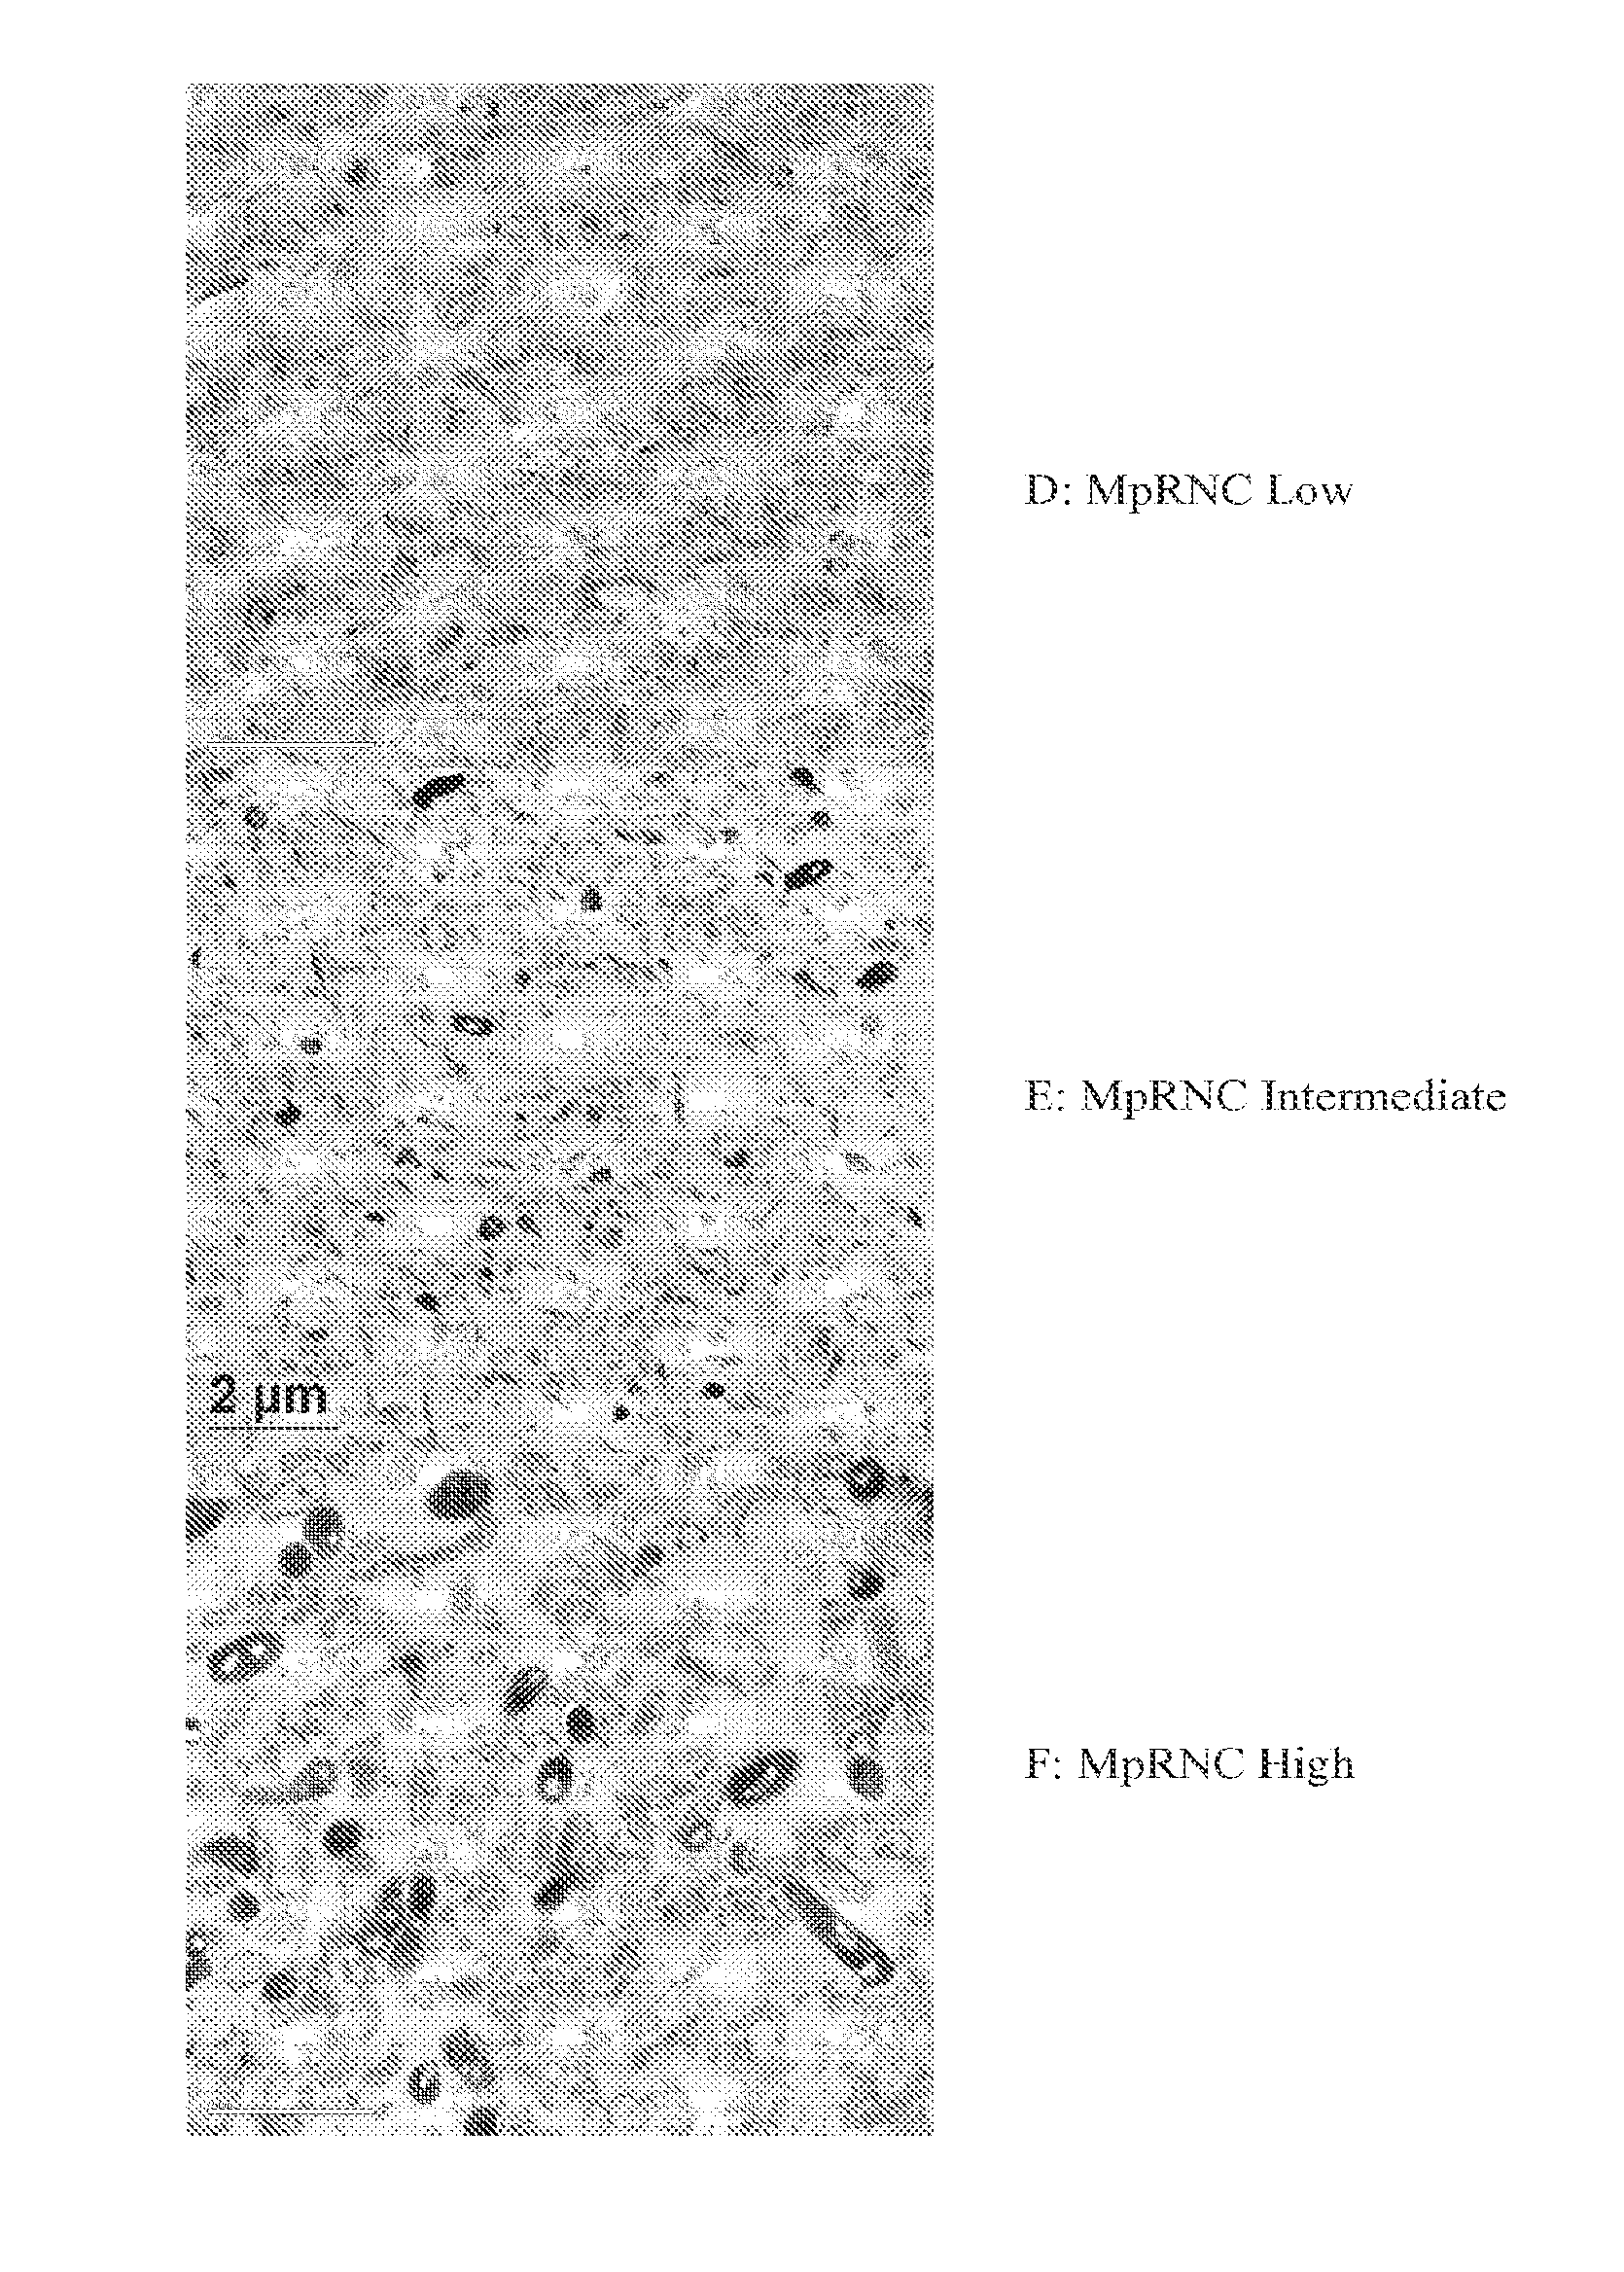 Bacterial Ribonucleic Acid Cell Wall Compositions and Methods of Making and Using Them